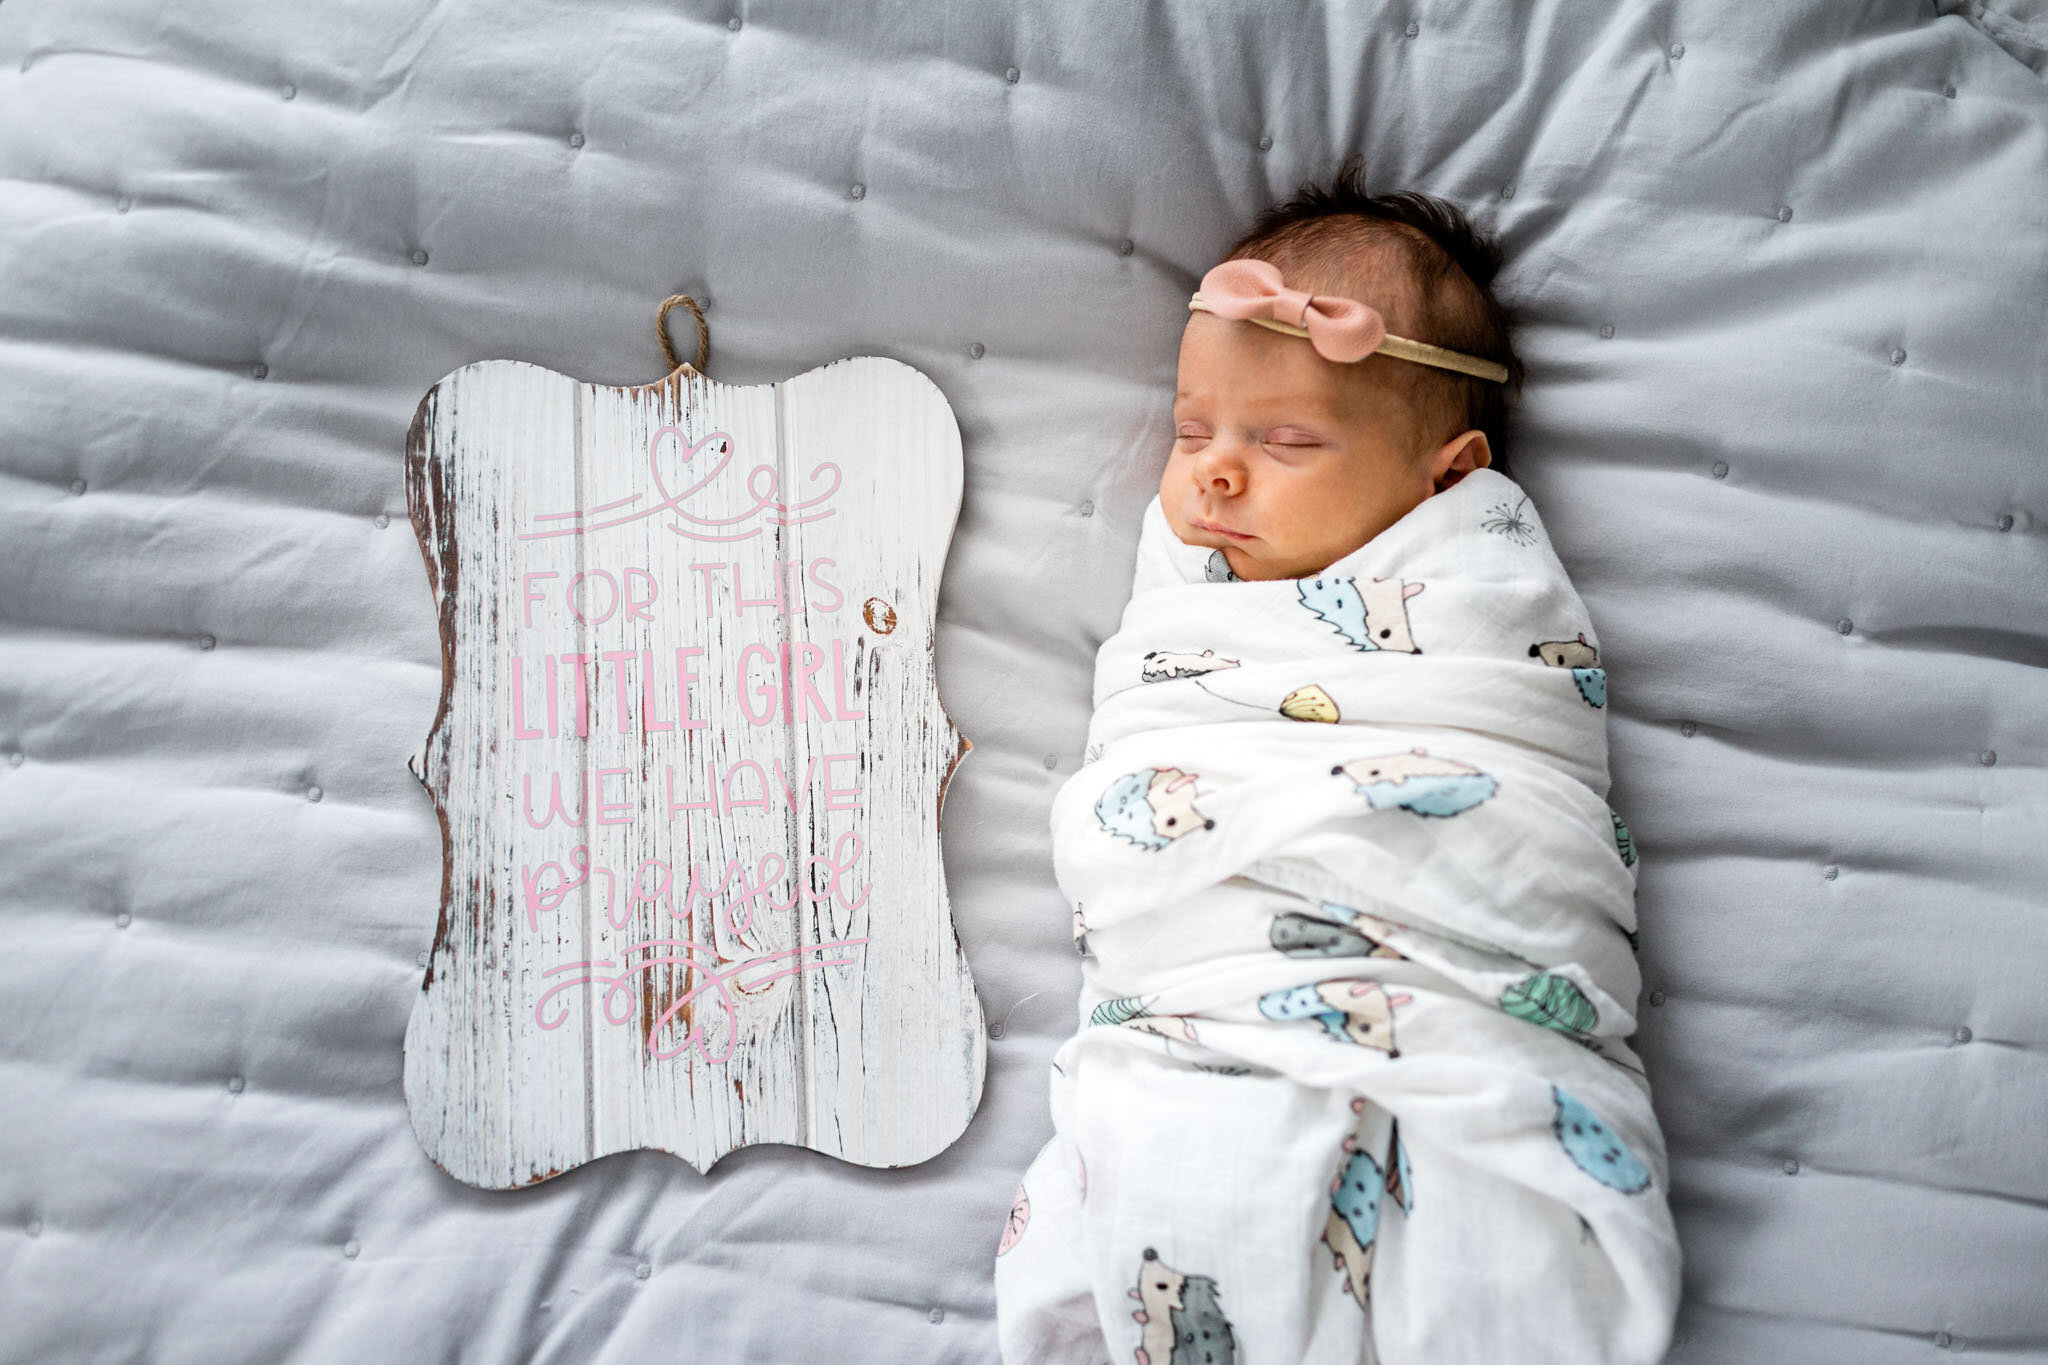 Durham Newborn Photographer | By G. Lin Photography | Baby girl with sign laying on bed